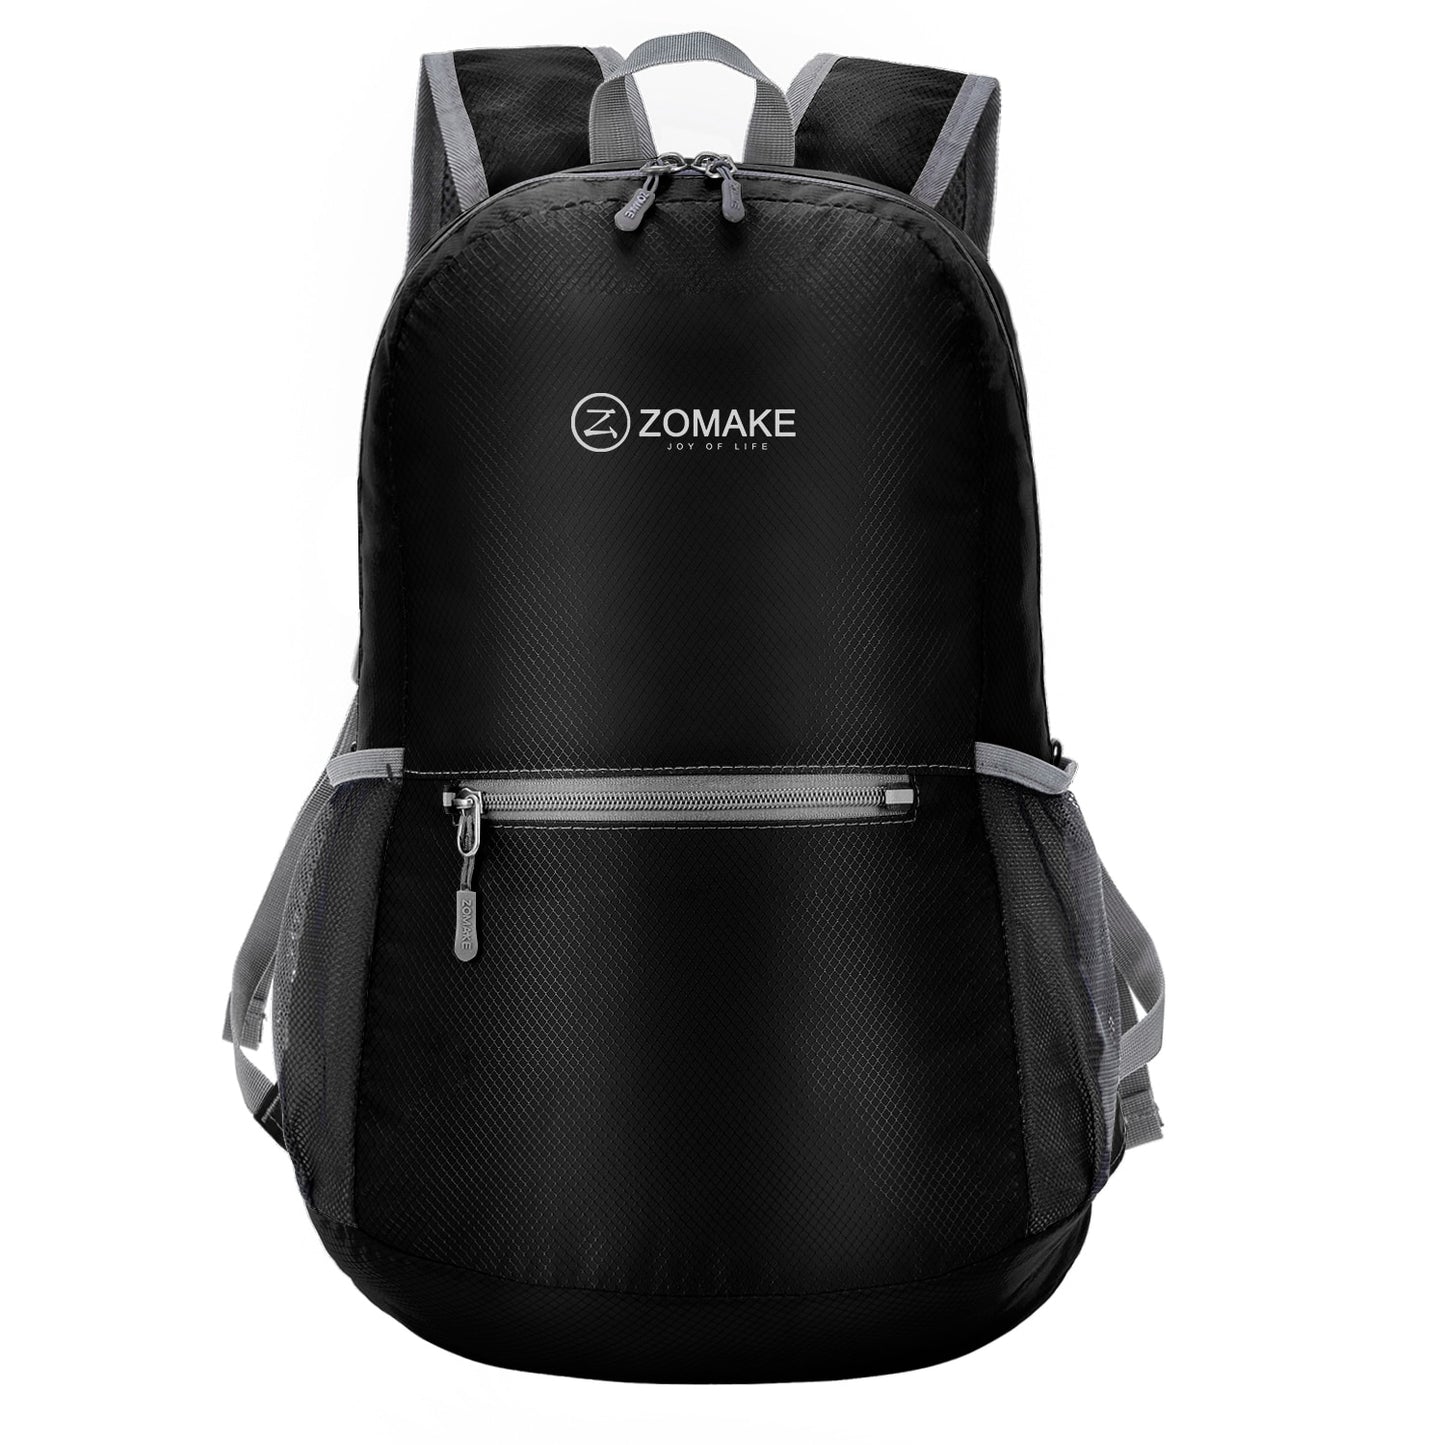 ZOMAKE Ultralight Packable Backpack